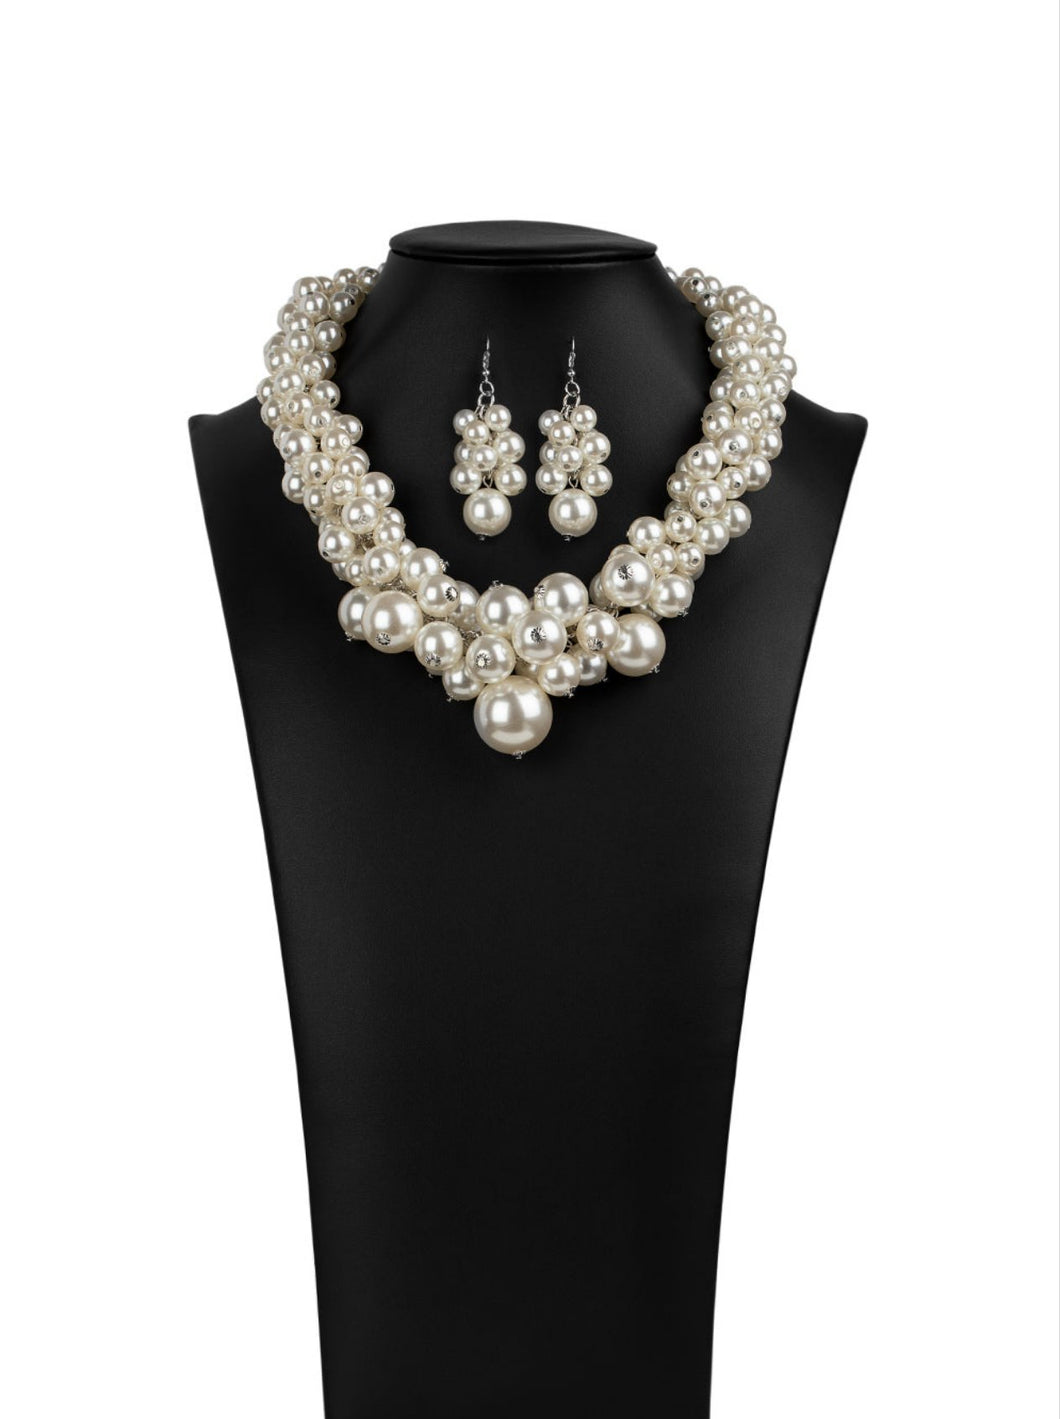 Regal 2020 Zi Collection Necklace and Earrings